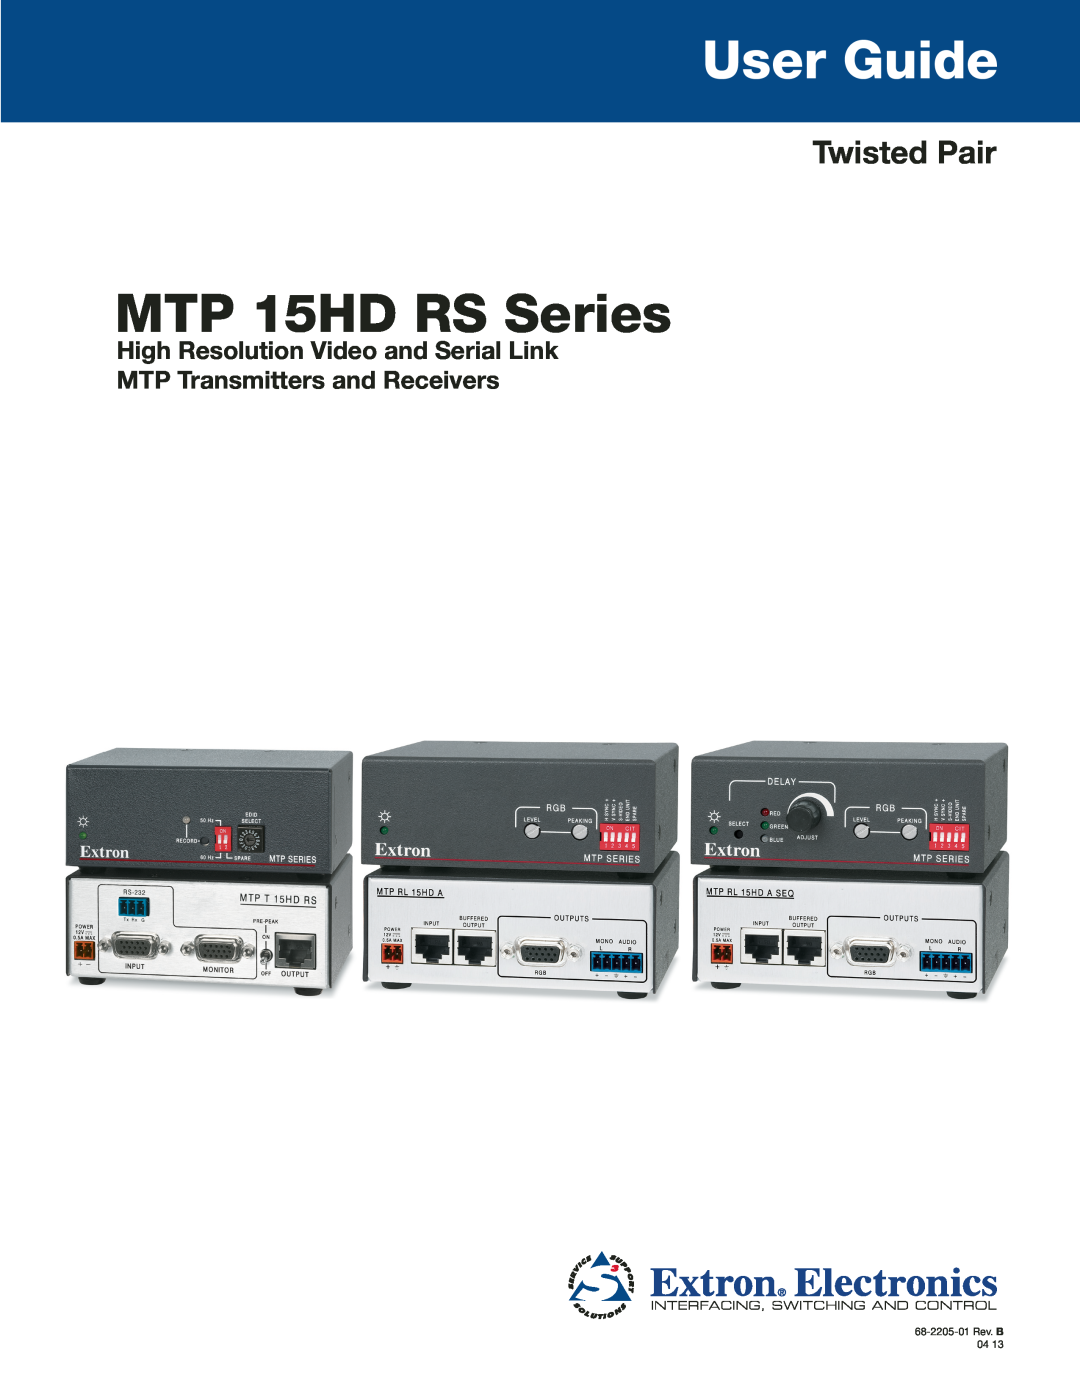 Extron electronic manual MTP 15HD RS Series, User Guide, Twisted Pair, High Resolution Video and Serial Link 